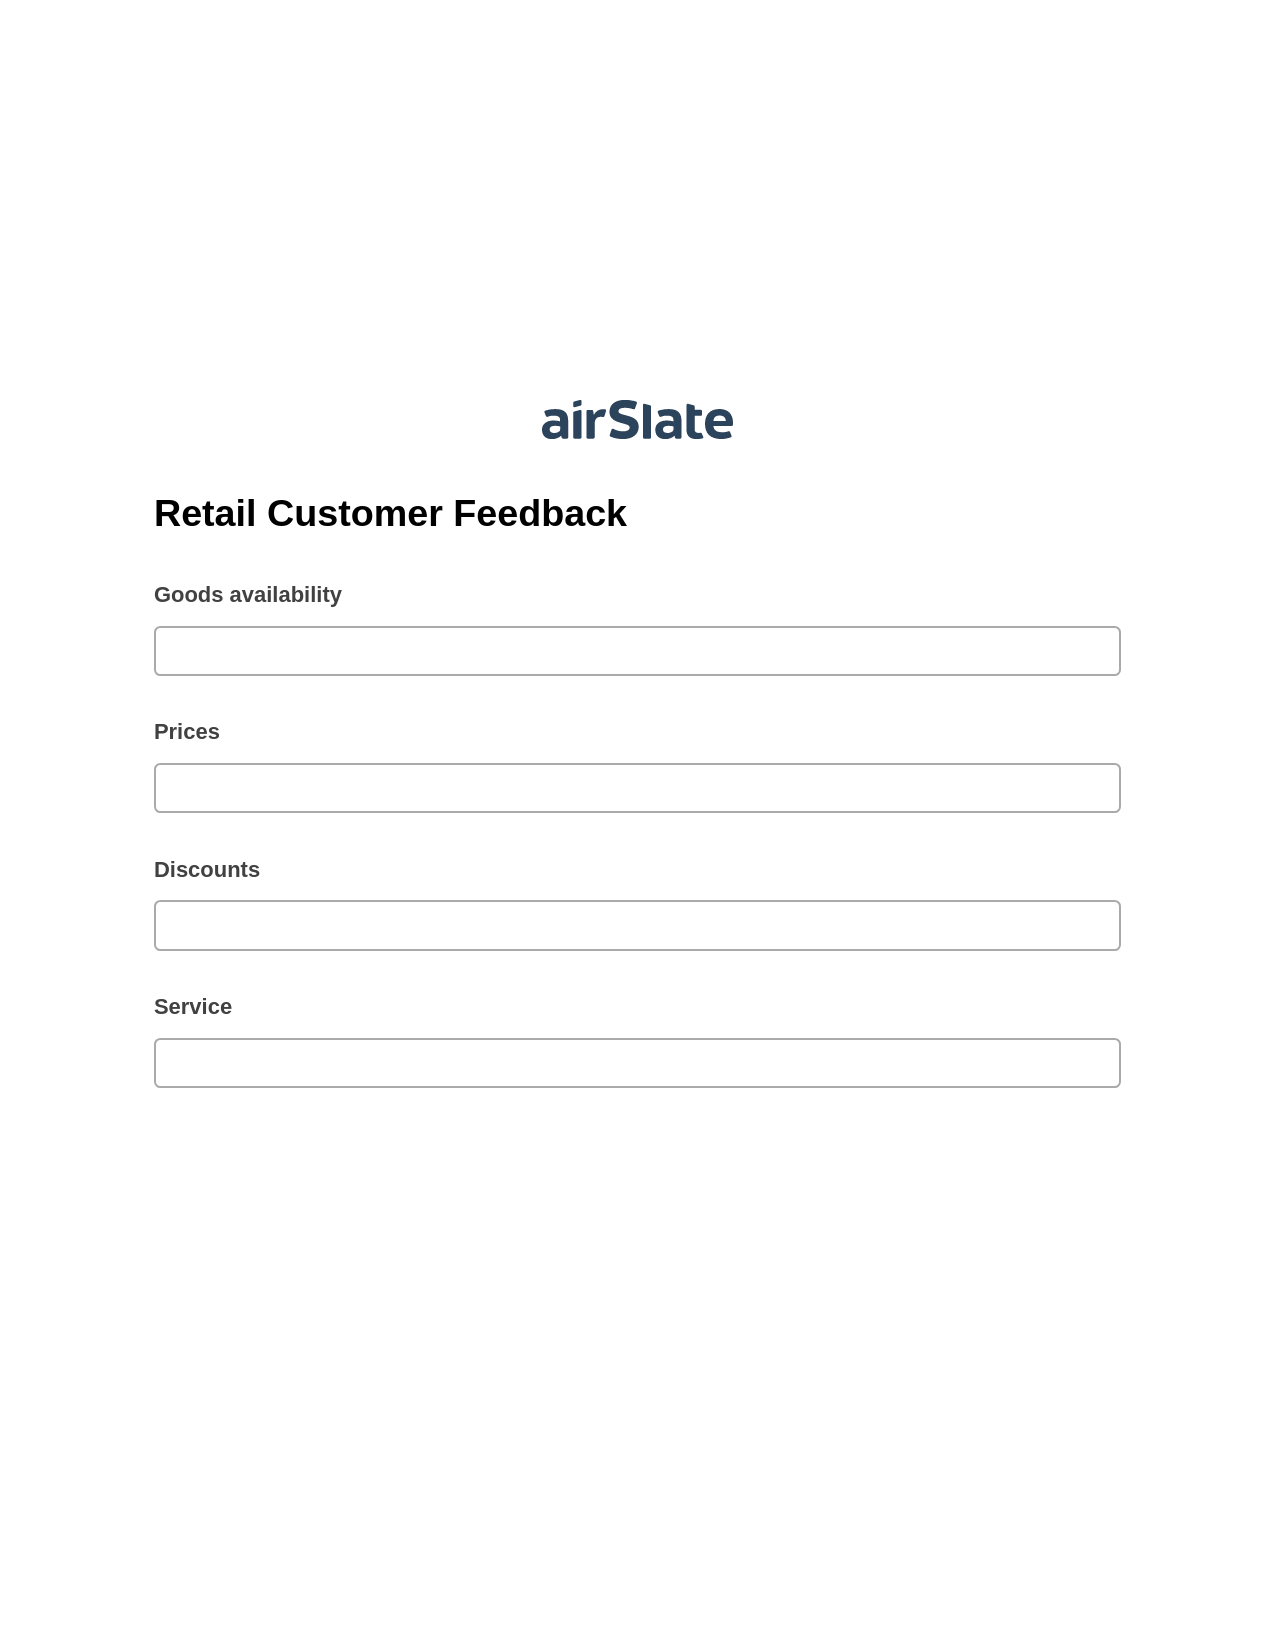 Retail Customer Feedback Pre-fill Dropdowns from Google Sheet Bot, Unassign Role Bot, Export to Google Sheet Bot